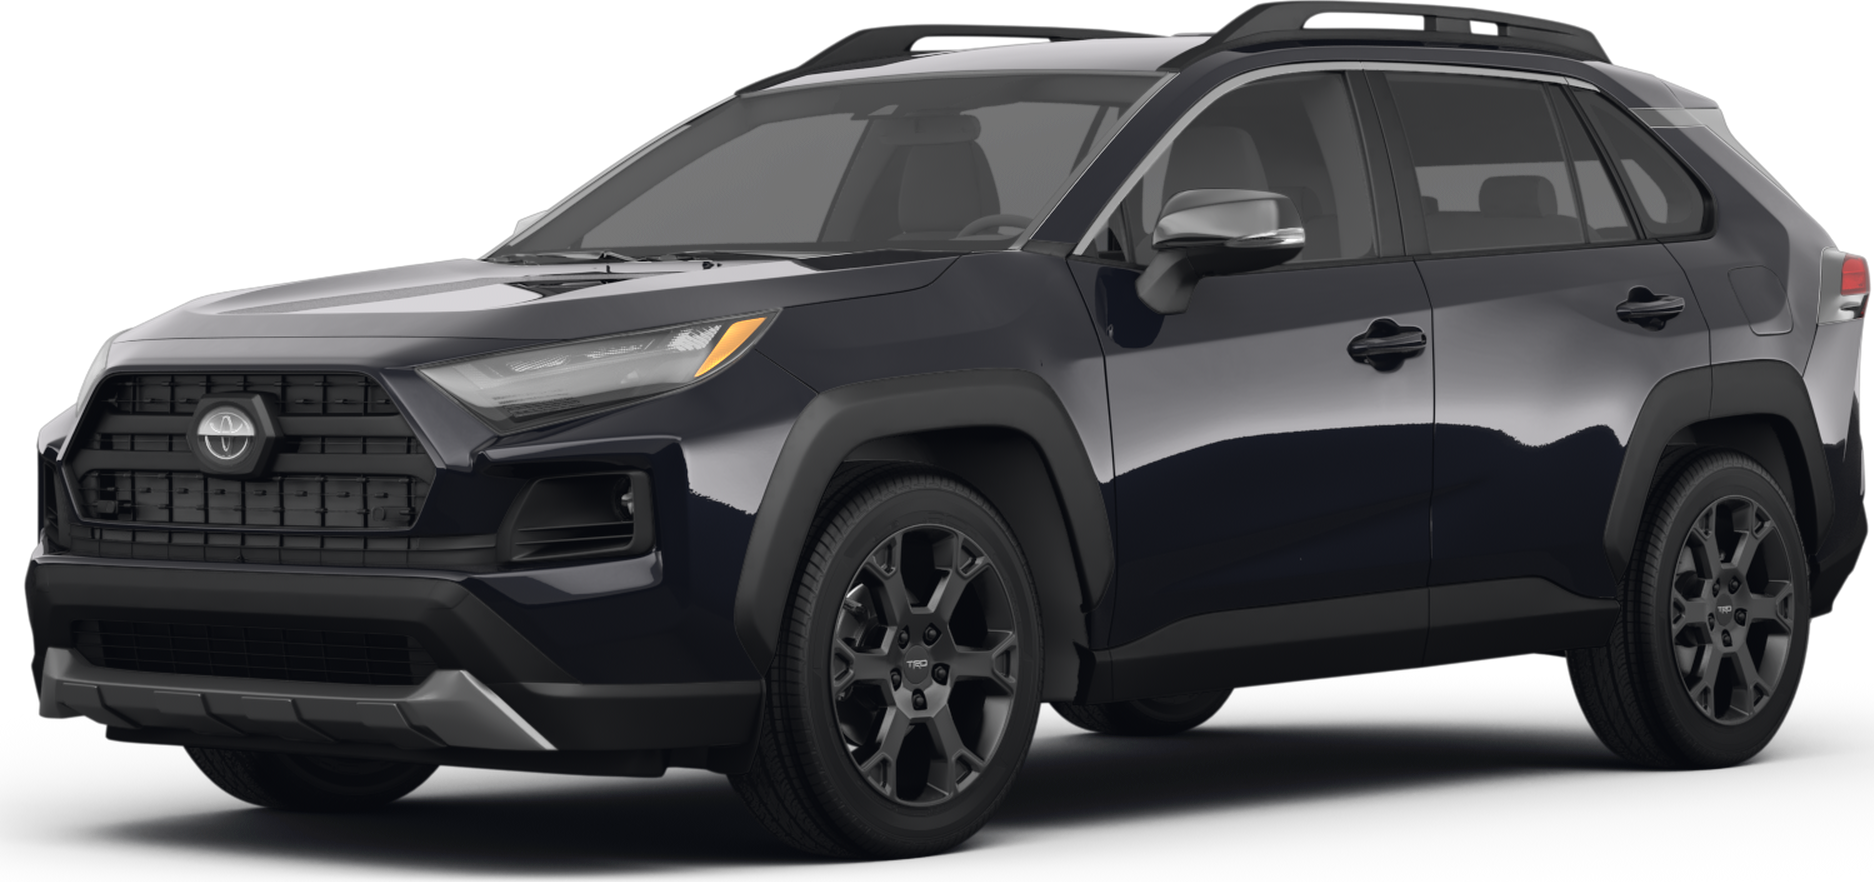 2022 Toyota RAV4 Price, Reviews, Pictures & More Kelley Blue Book